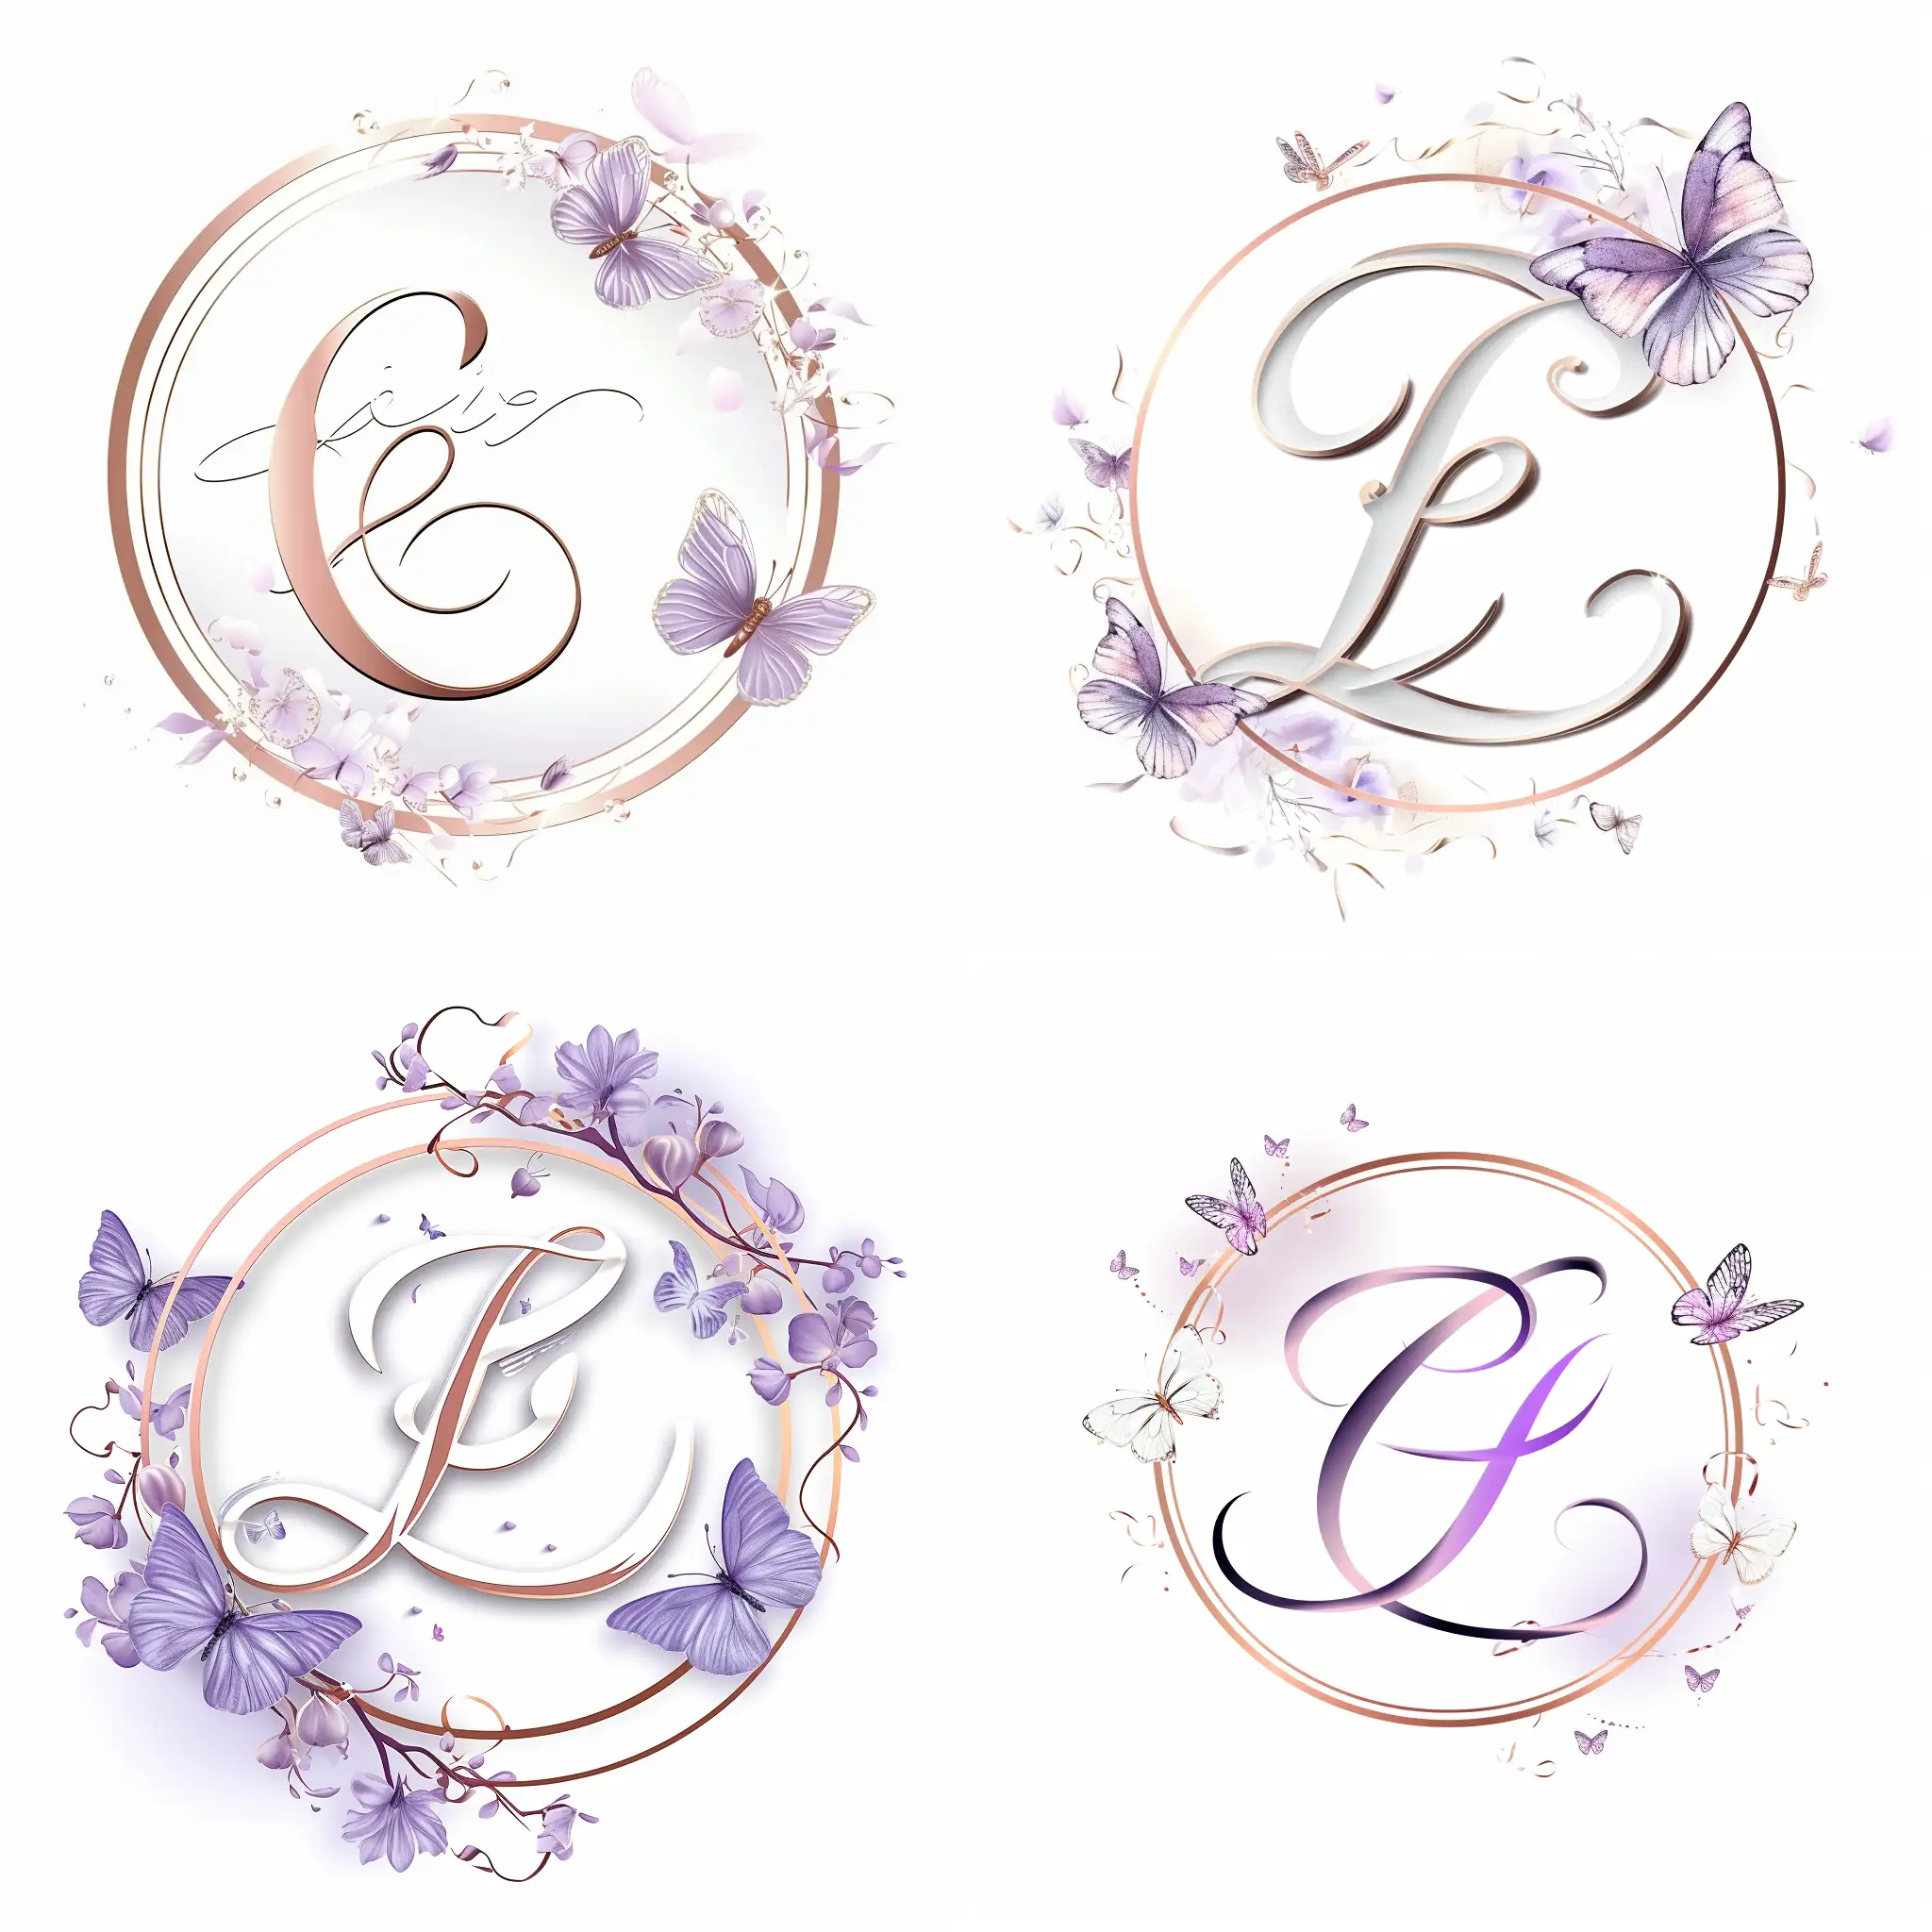 Make a realistic and fancy logo for a high prestige beauty business. Have a big cursive letter E in the middle thats color white with some lilac. Include some small realistic butterflies. Have it all in a rose gold circle. Make the background white.